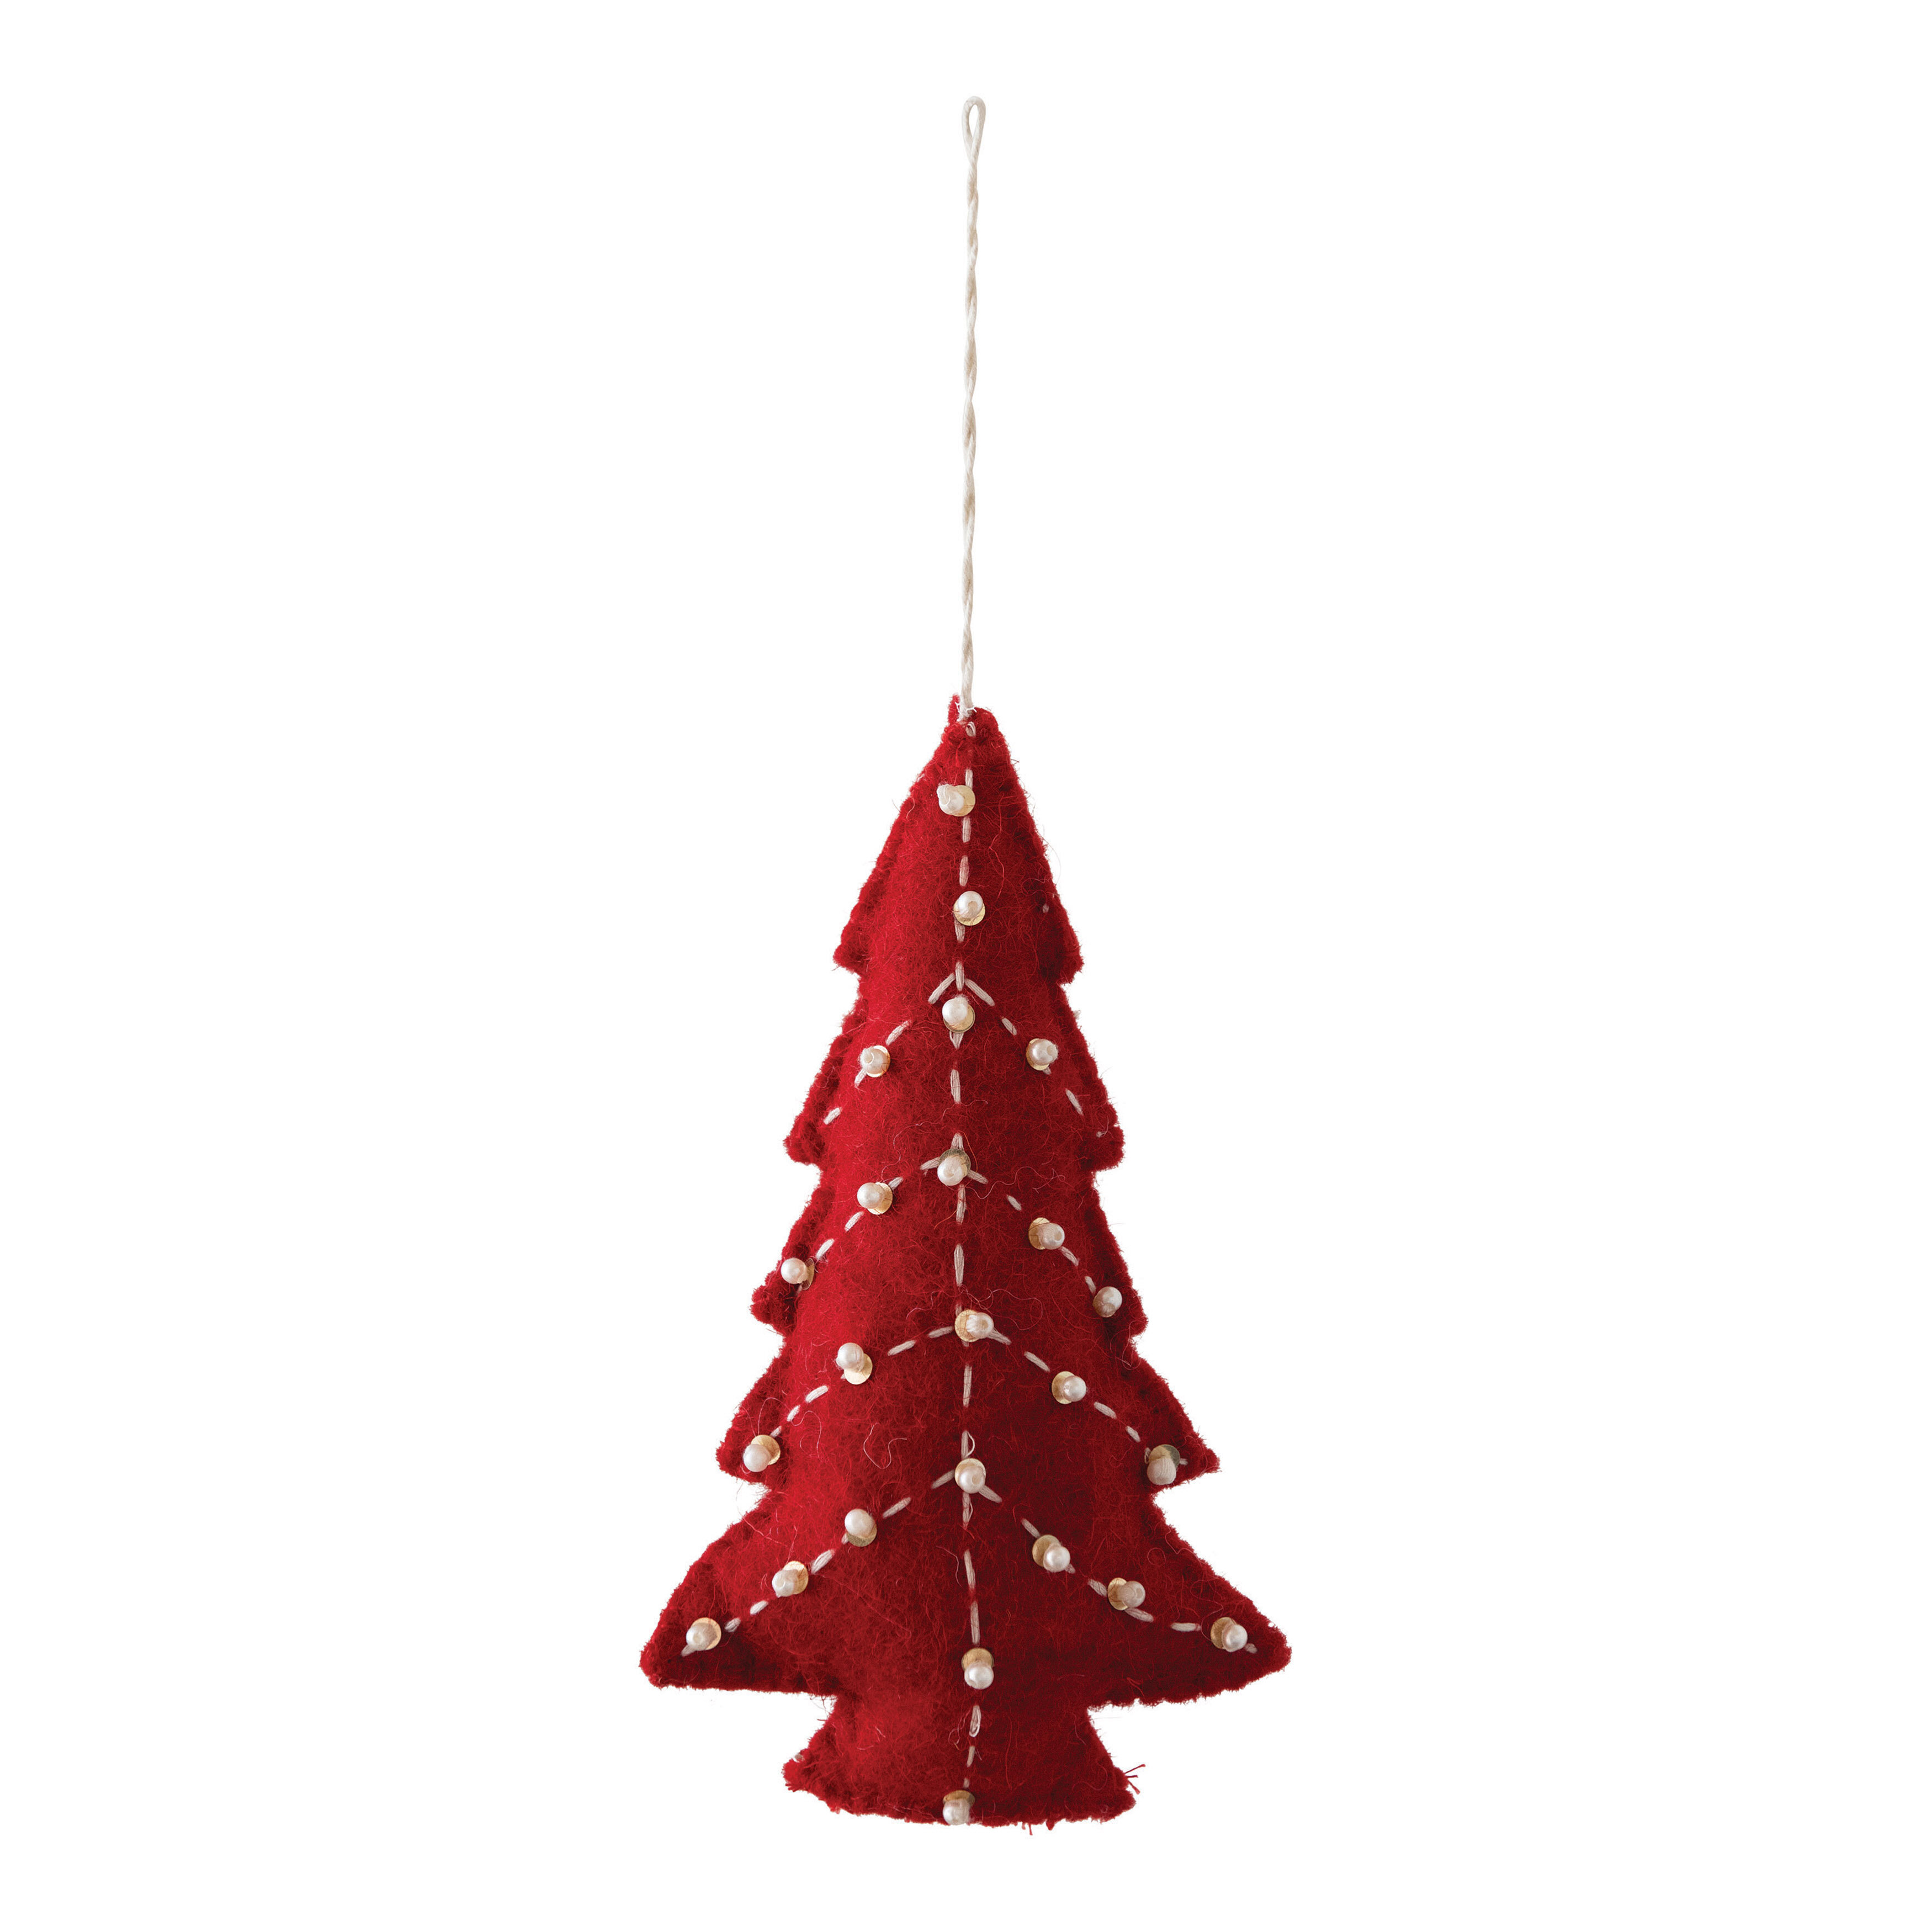 Unique and Festive Cone-Shaped Christmas Trees